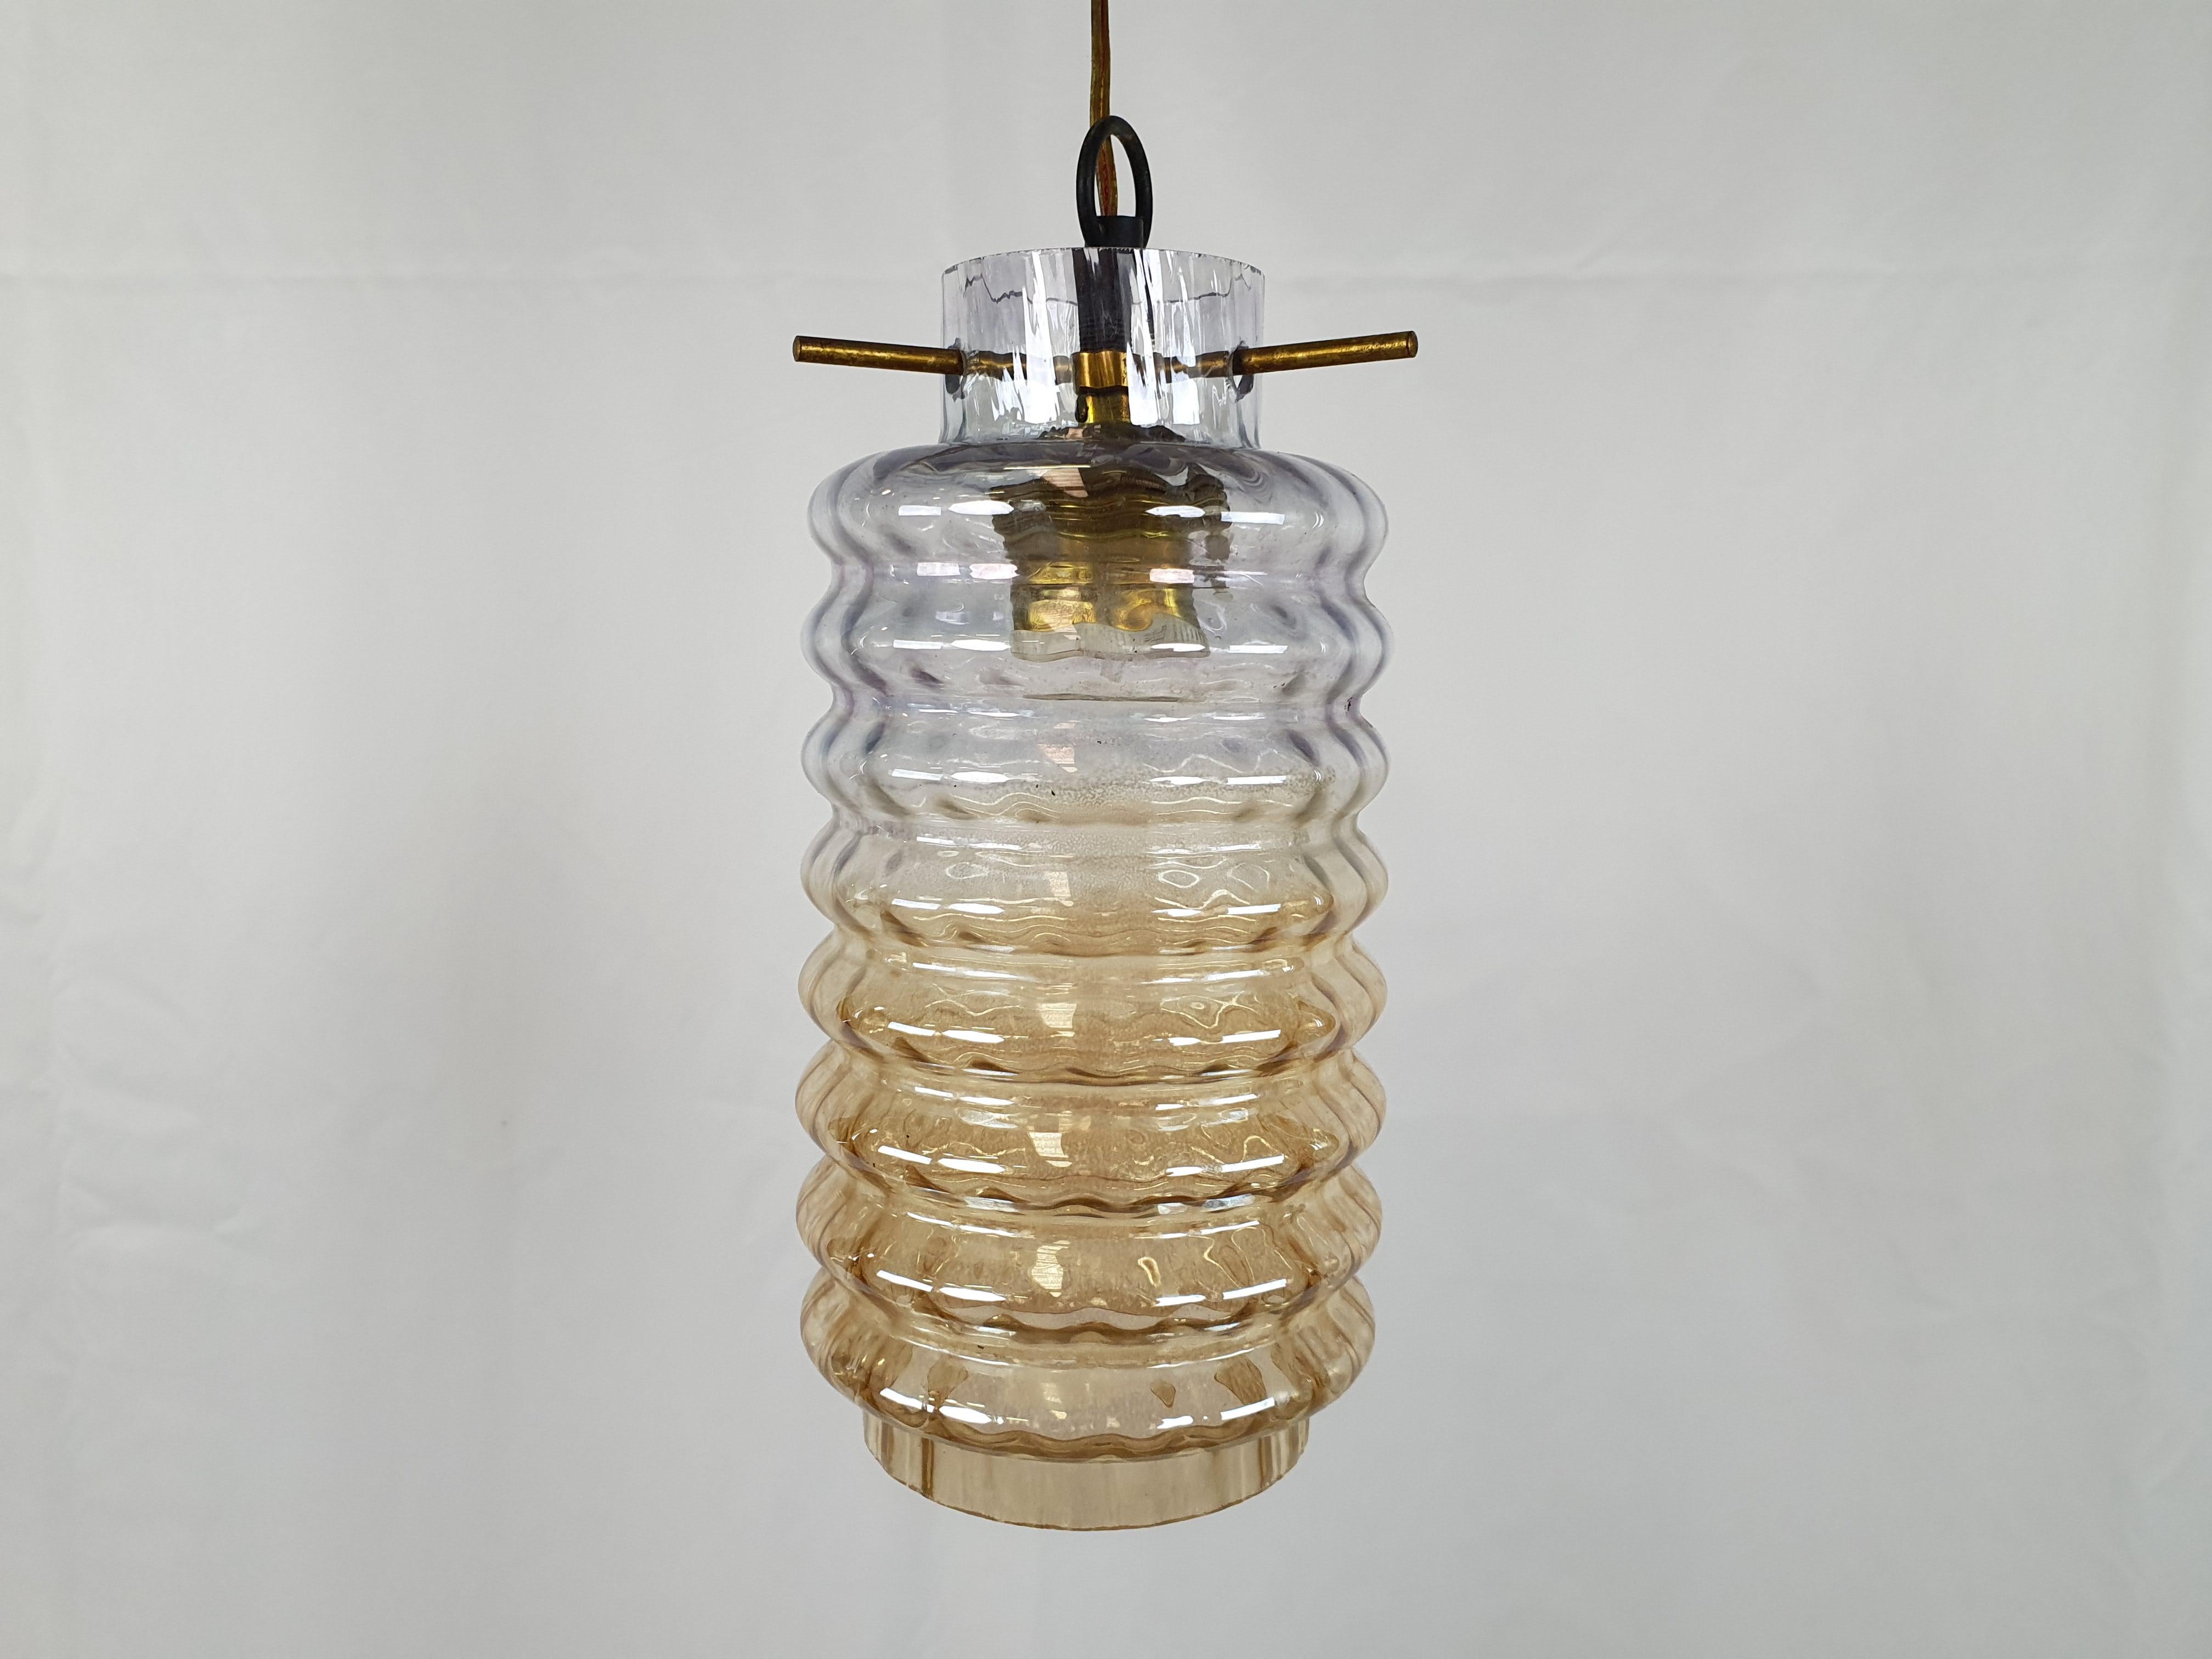 Compact tubular glass and smoked glass chandelier, Italian production in the 1970s.

Structure locked to the main support by three small unscrewable brass pins for bulb replacement.

Has normal signs of wear consistent with age and use. We